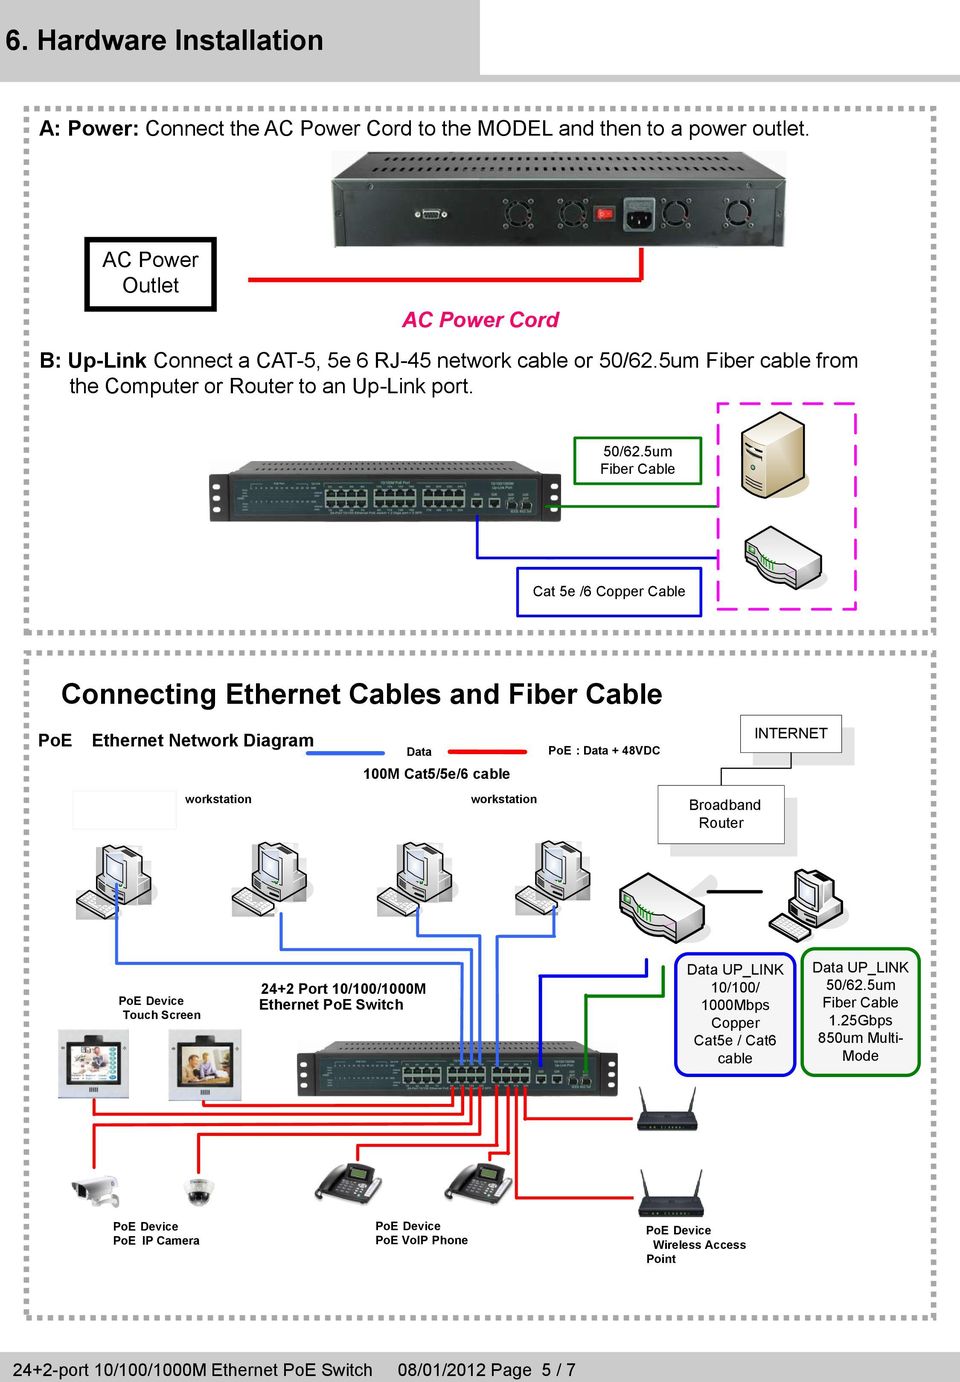 5um Fiber cable from the Computer or Router to an Up-Link port. 50/62.